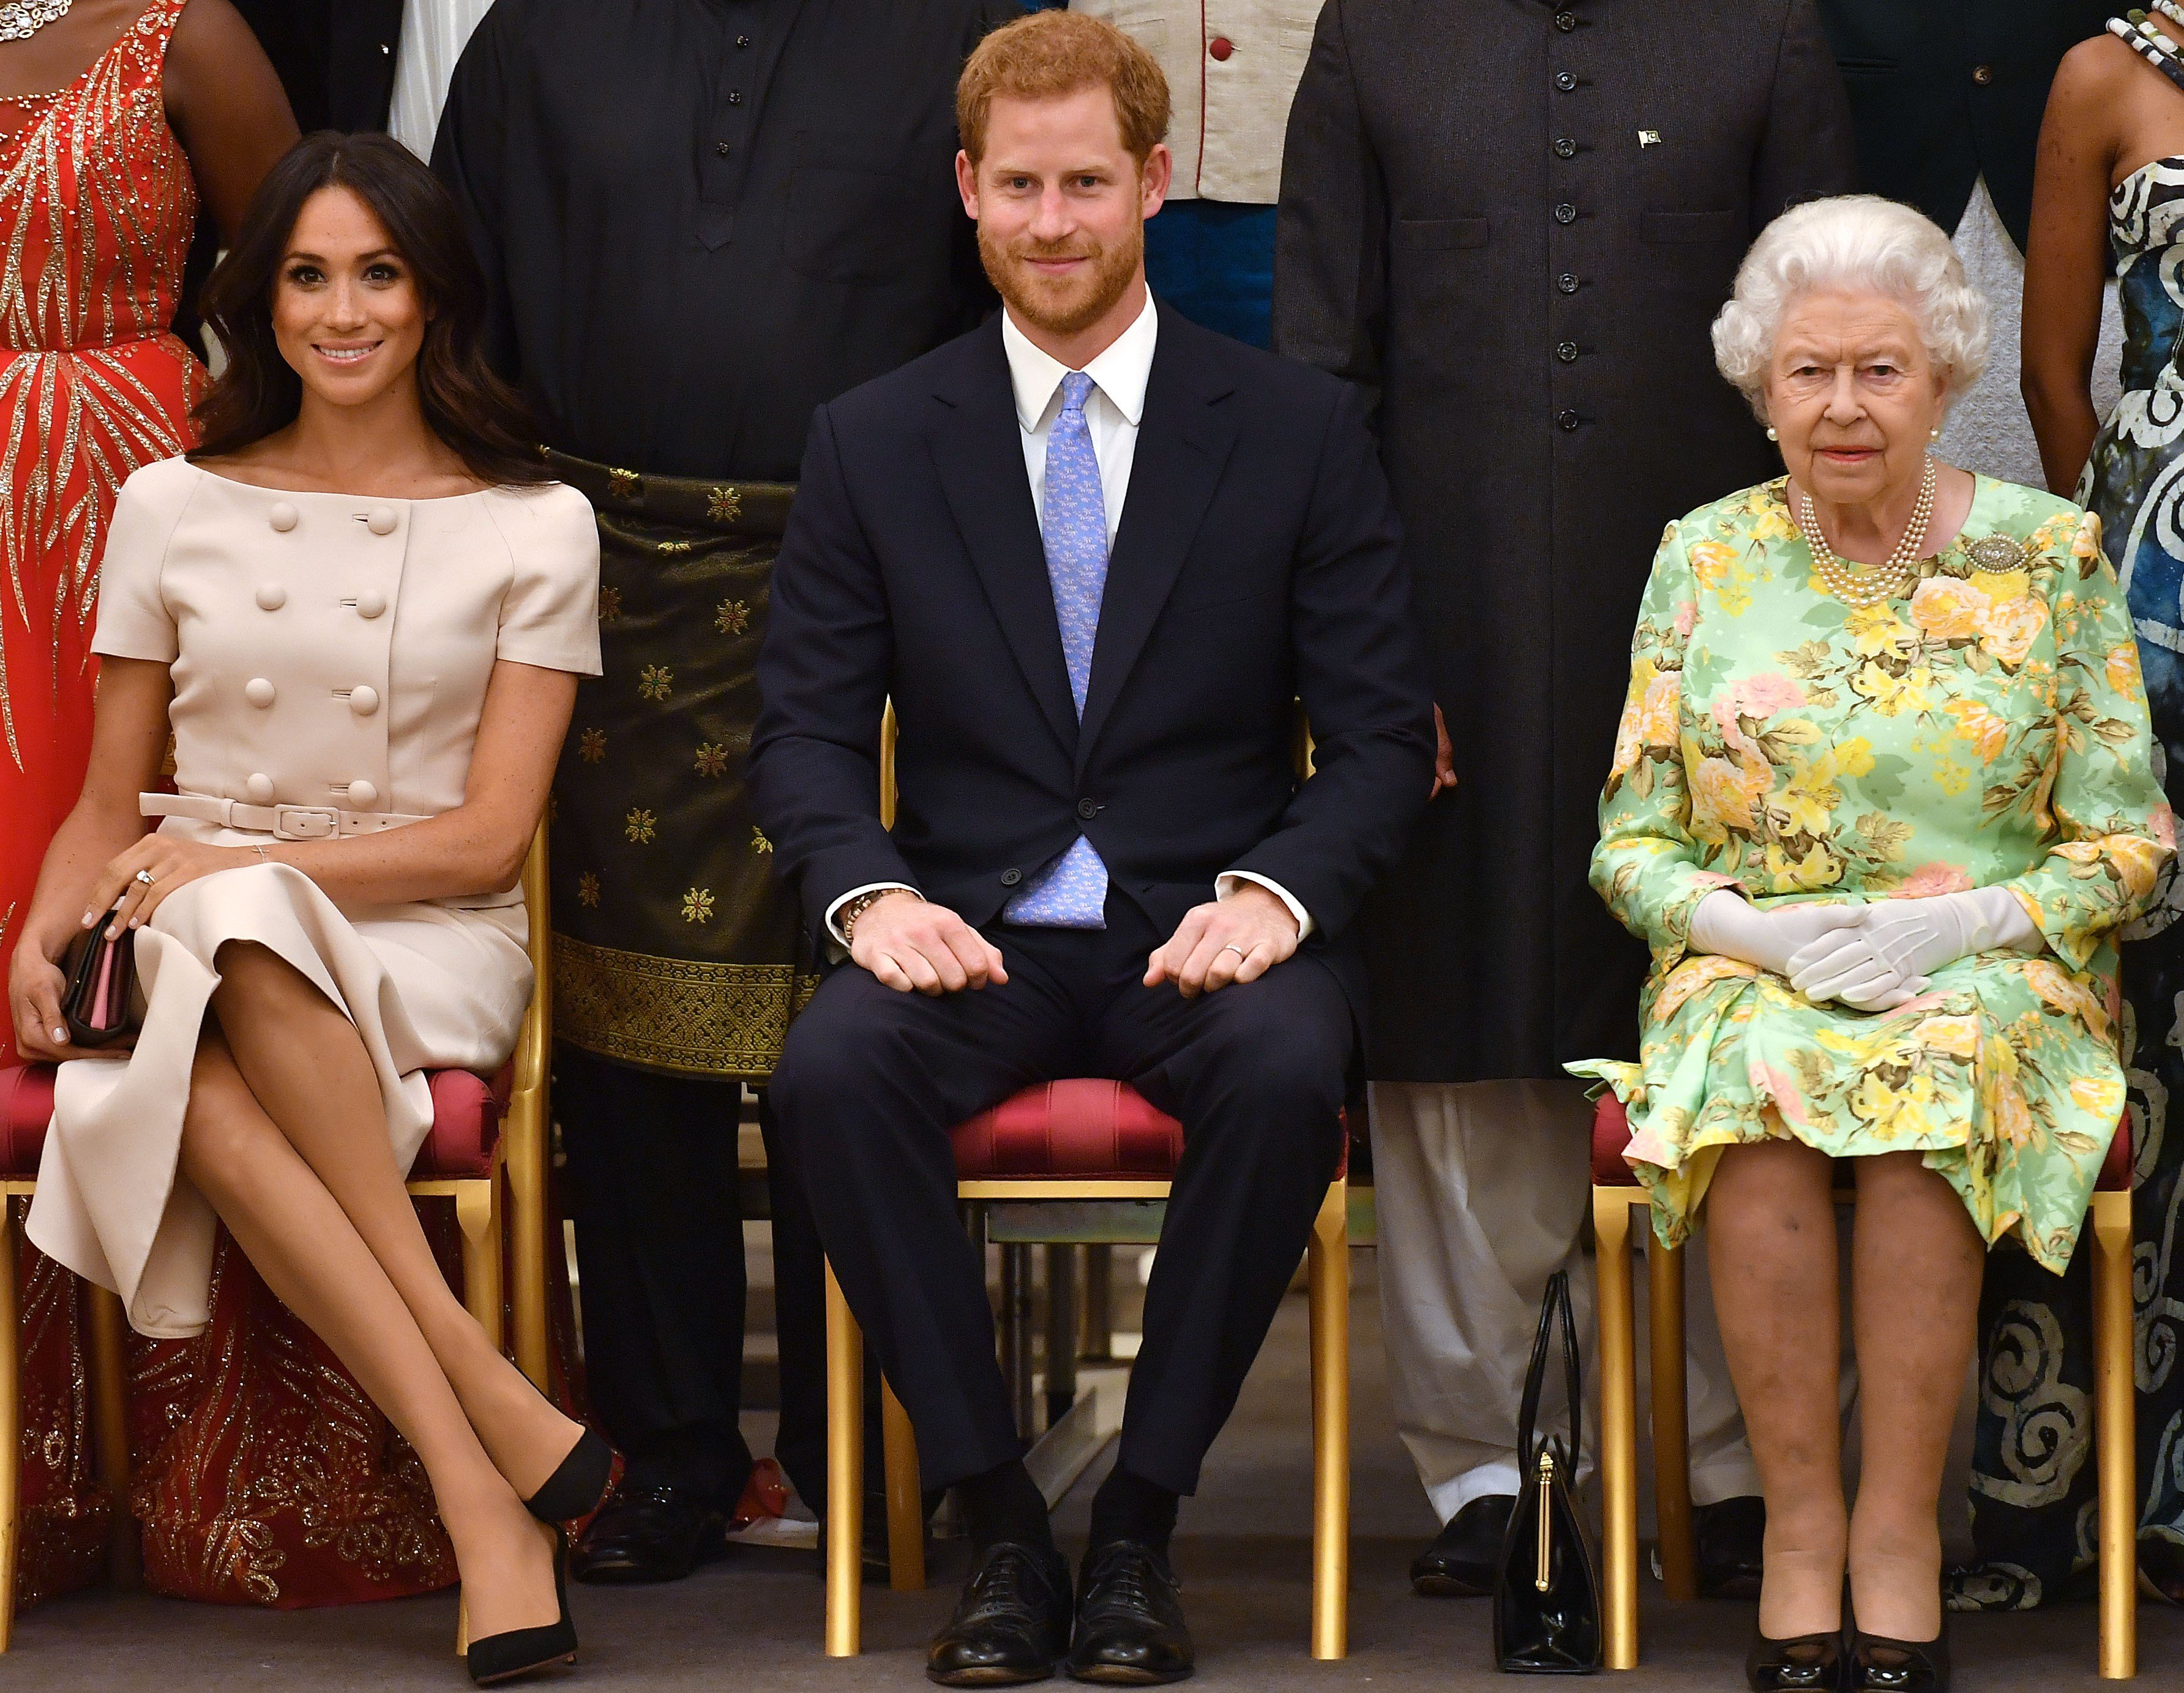 Meghan Markle, Prince Harry, and Queen Elizabeth II seated next to one another and posing for a photo at the Queen's Young Leaders Awards Ceremony